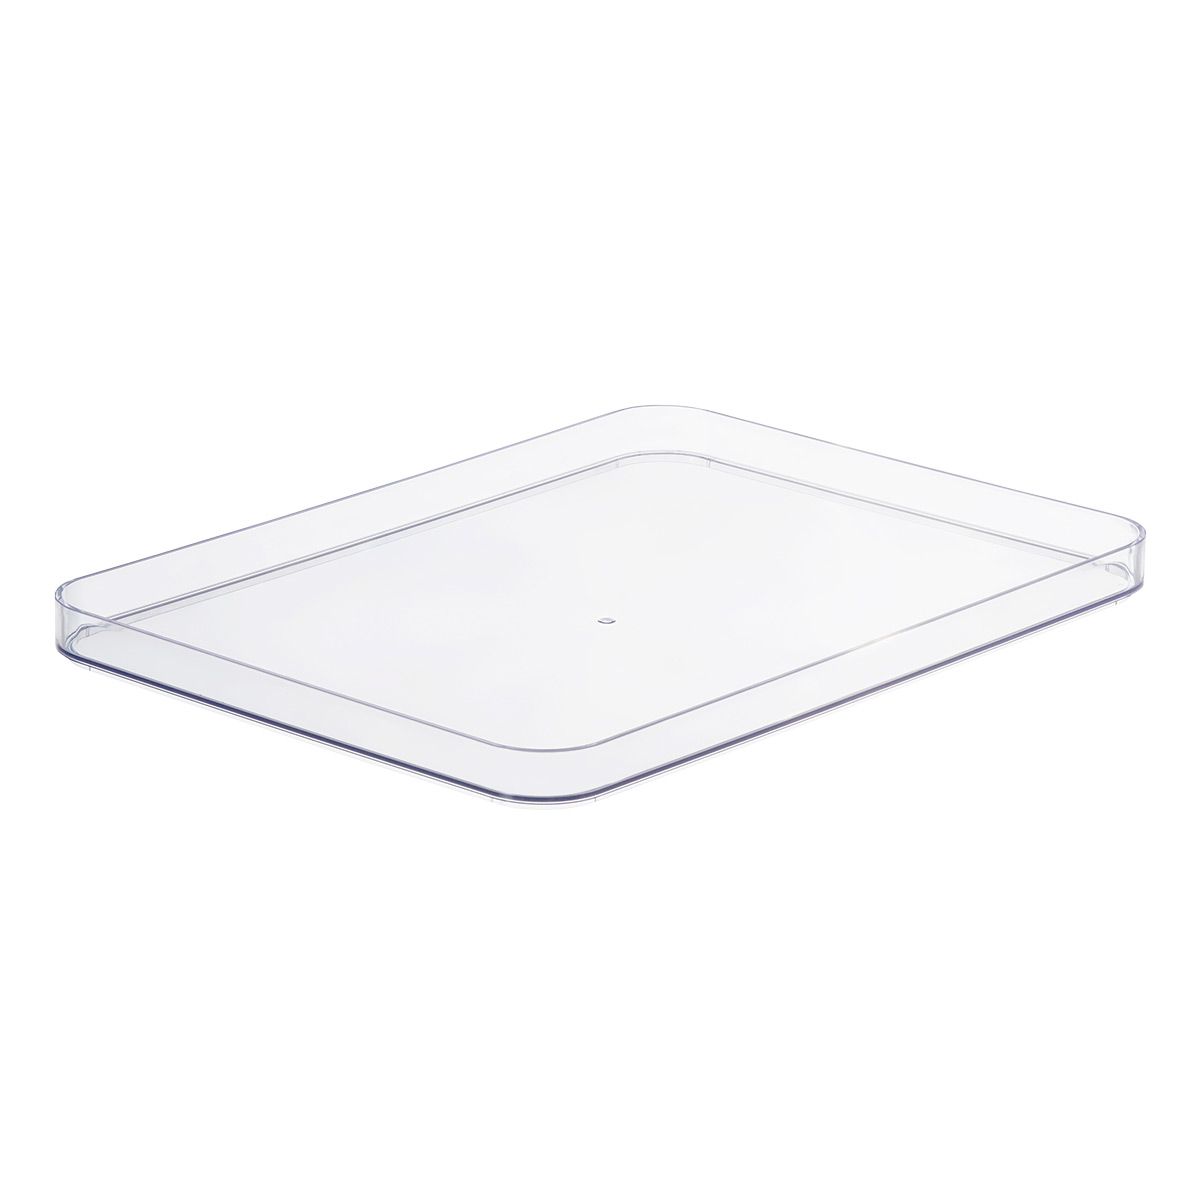 Compact Plastic Tray/Lid | The Container Store